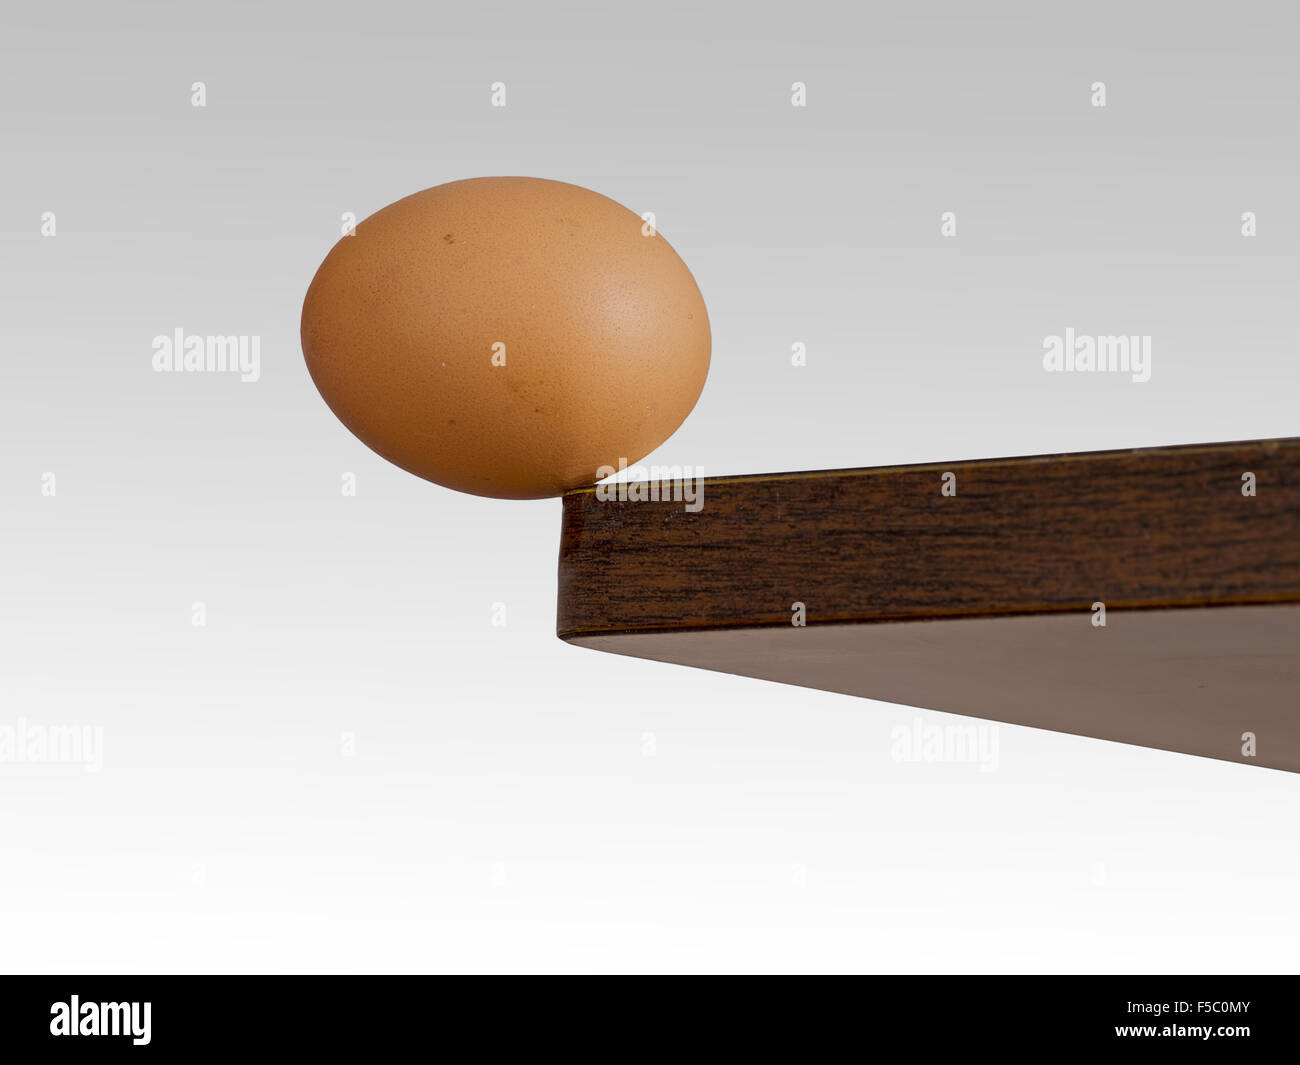 Real egg. Balanced on edge of table. Tipping point. Stock Photo